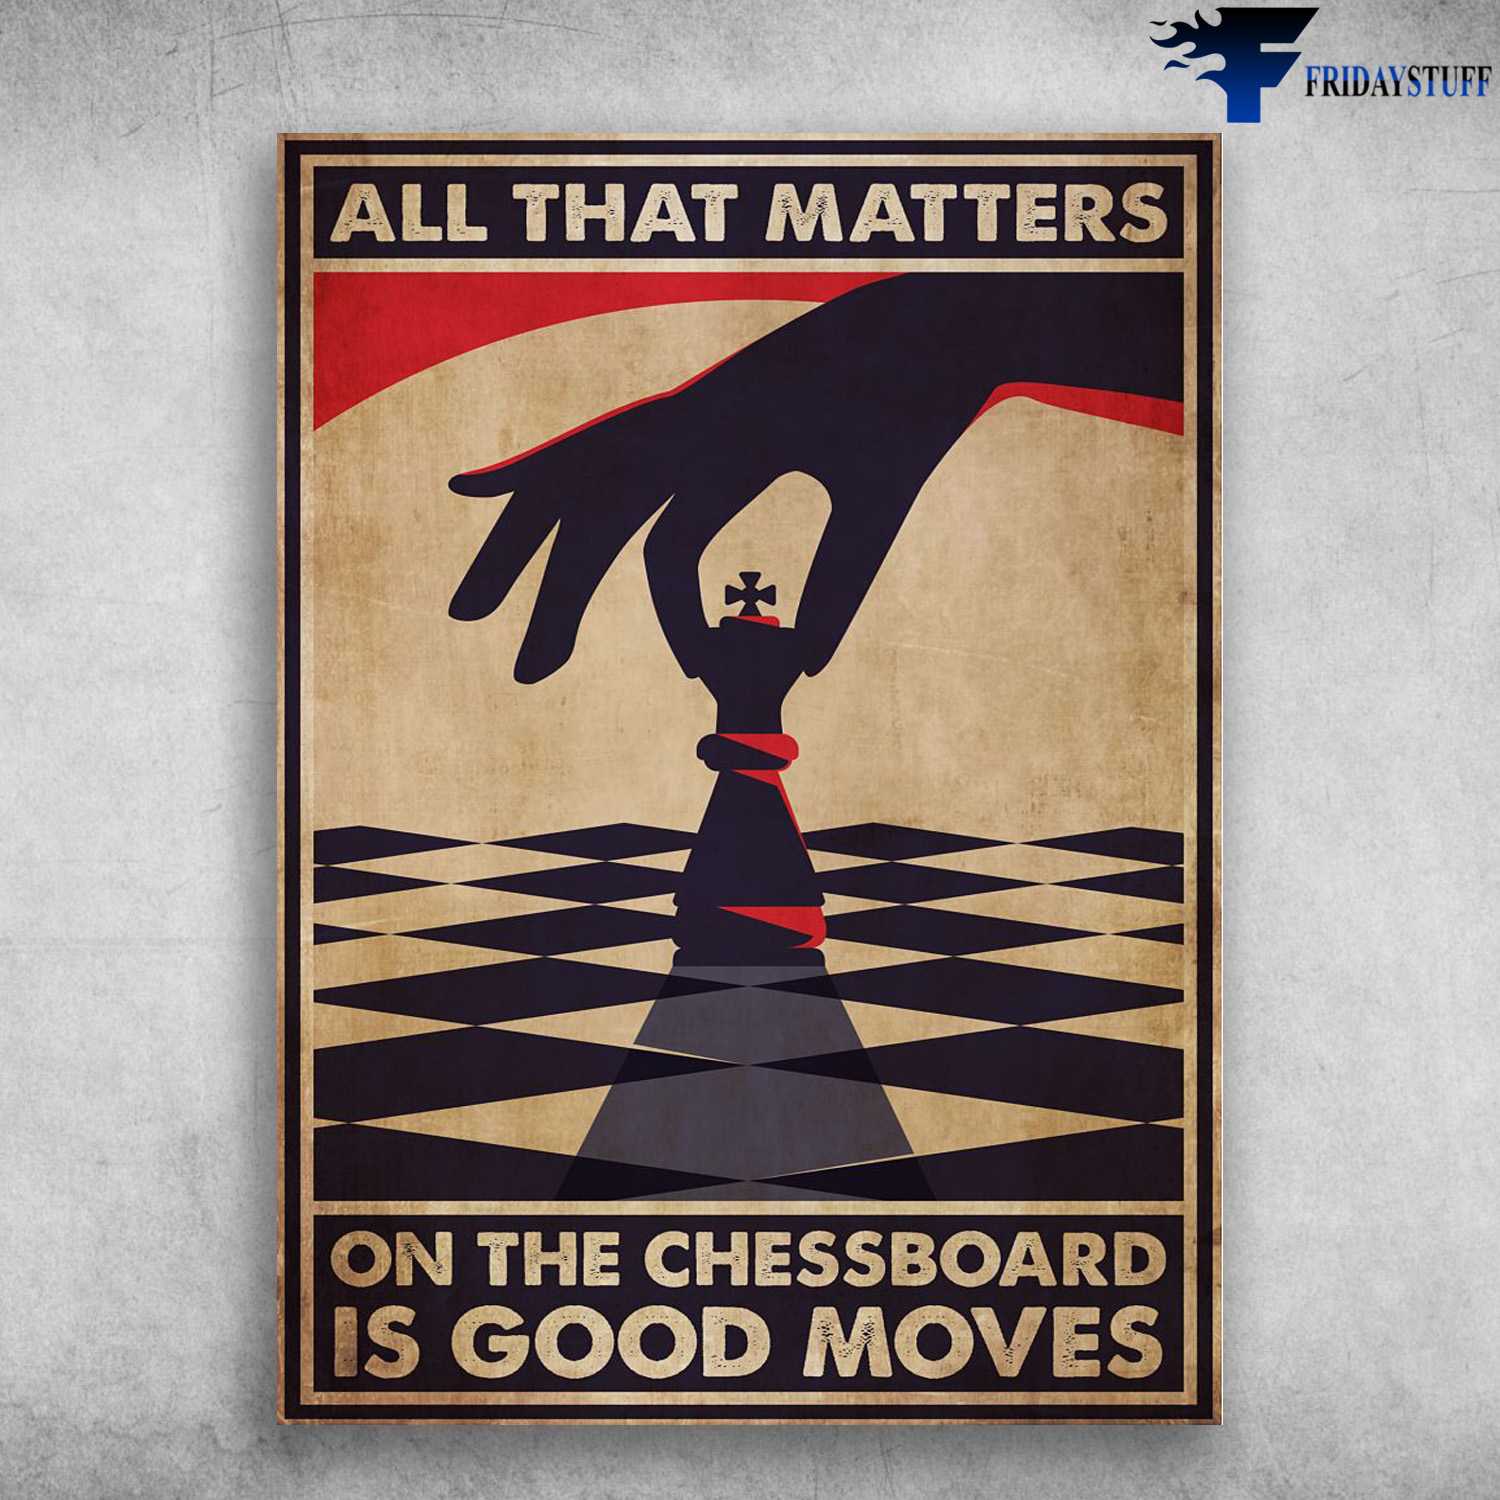 Chess Player, Chess Lover, Chess Poster, All That Matters, On The Chessboard, Is Good Moves